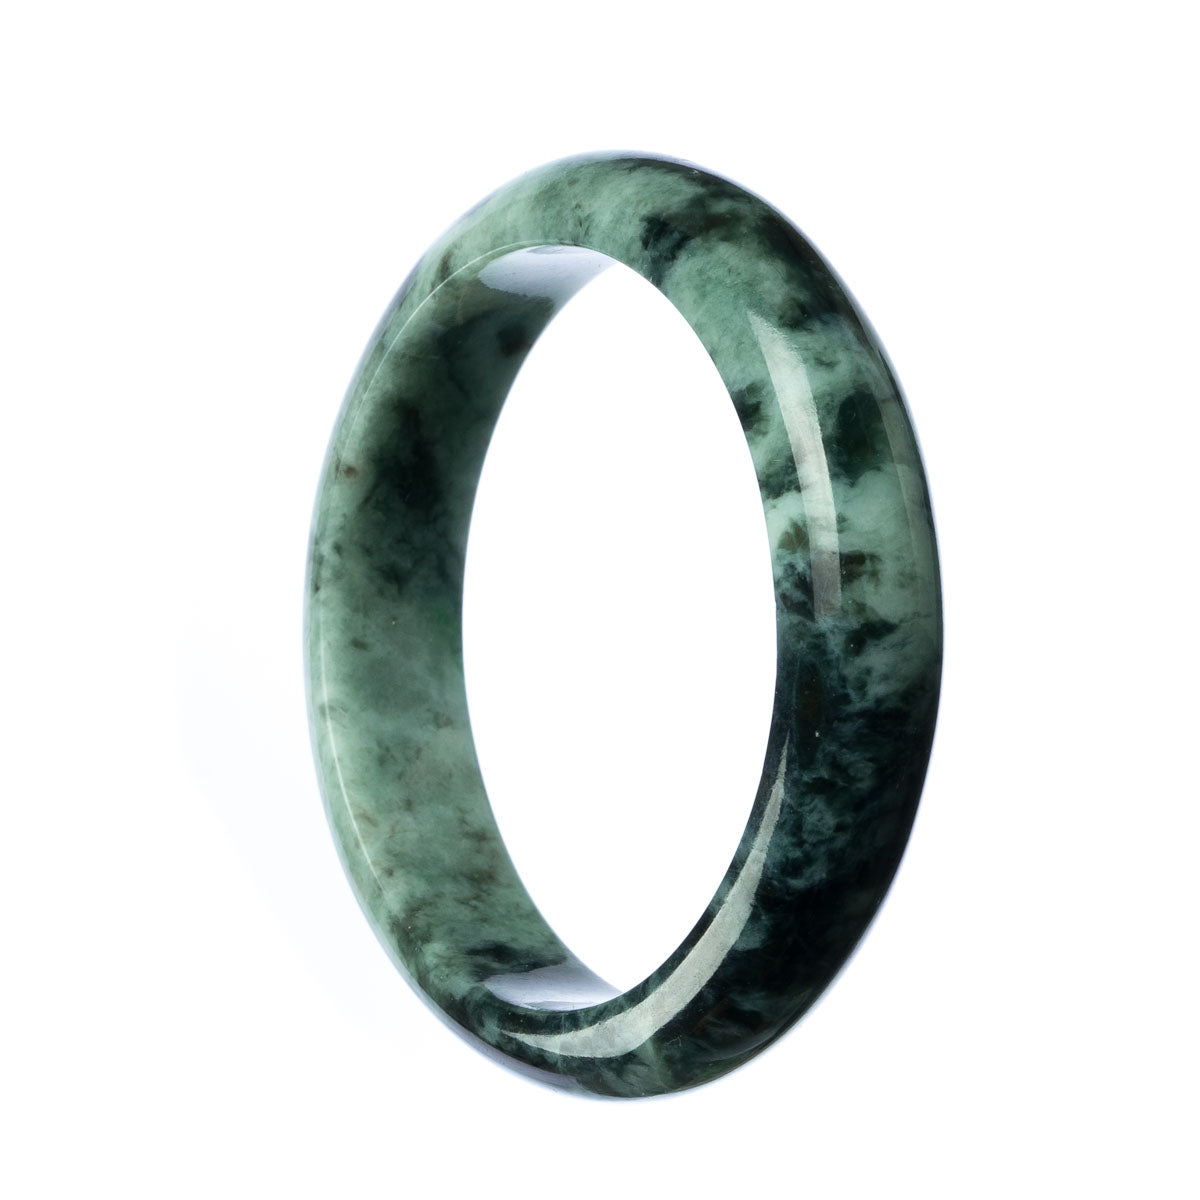 Image of a beautiful jade bangle with a half moon shape, measuring 59mm in diameter. The bangle is made of genuine grade A green Burma jade, known for its high quality and rich color. Designed by MAYS™, this bangle is a stunning piece of jewelry.